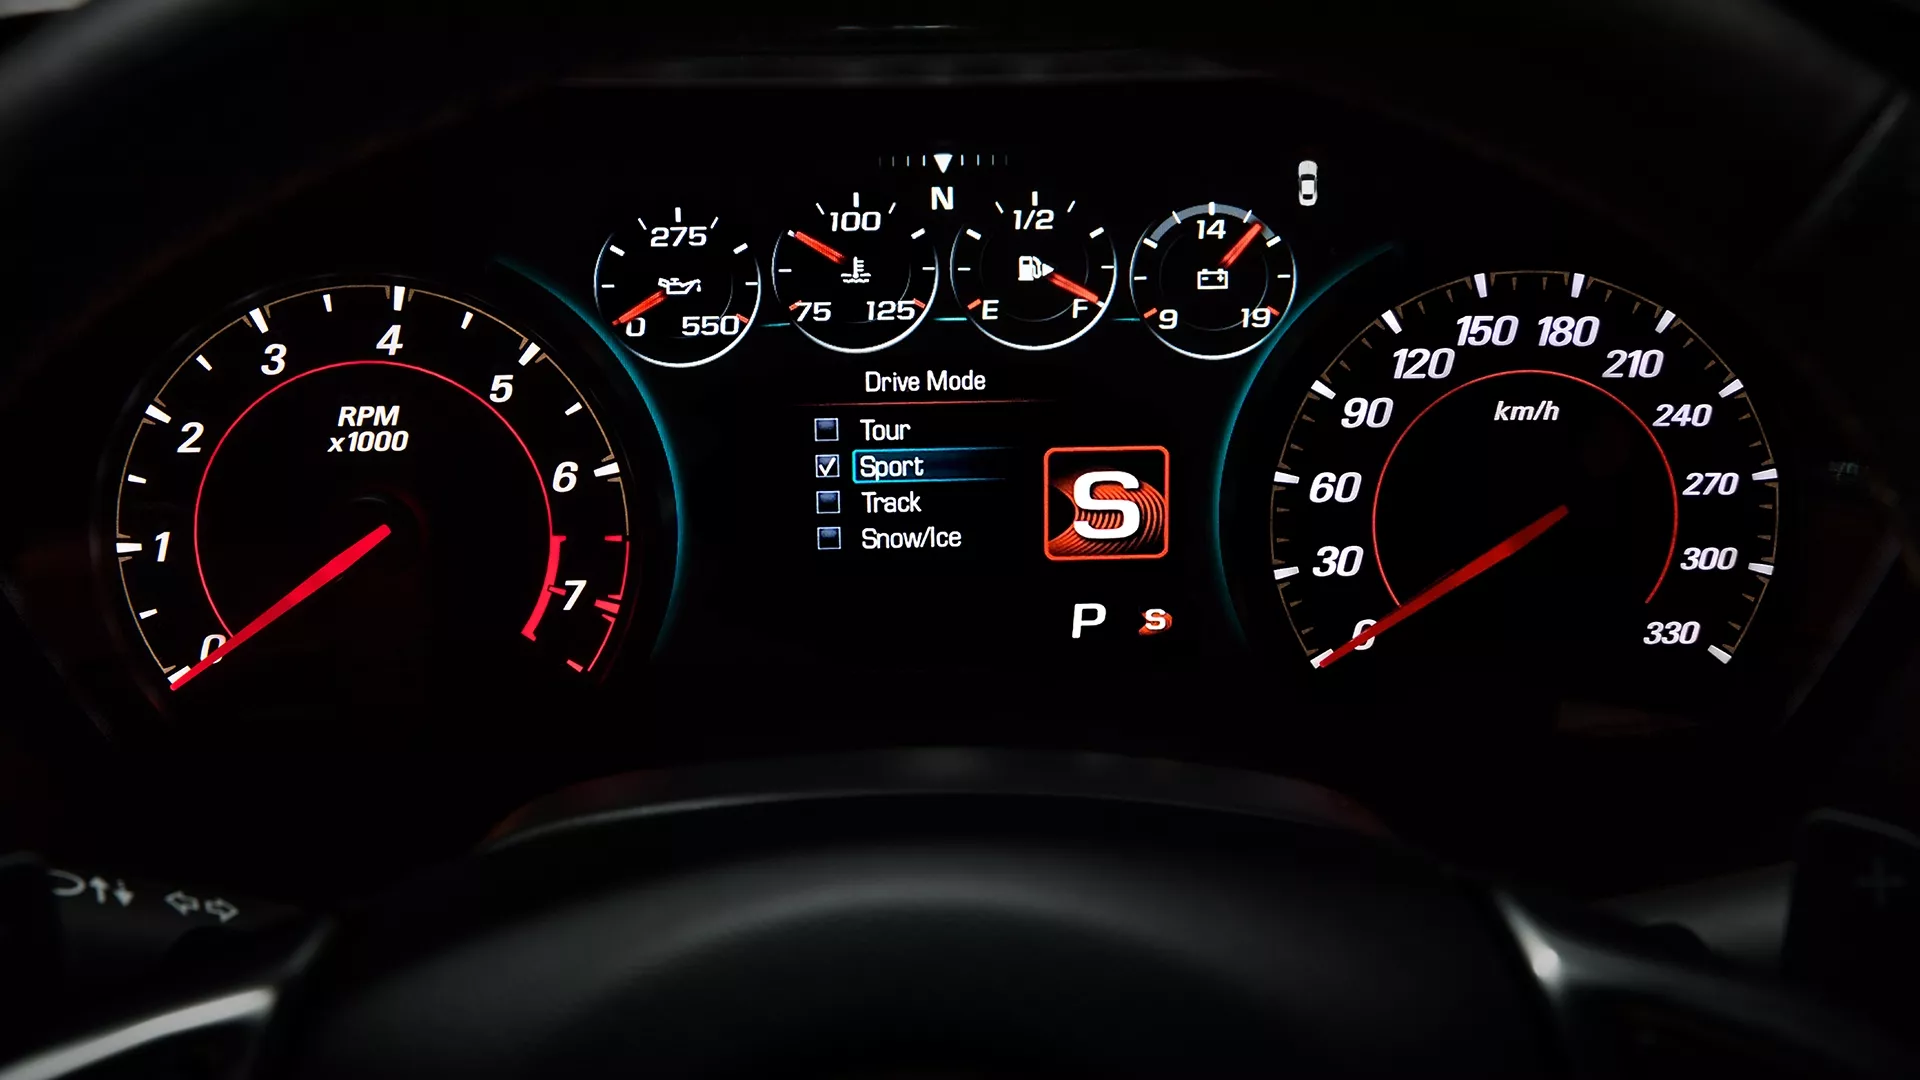 Driver Information Center displaying Drive Mode Selector